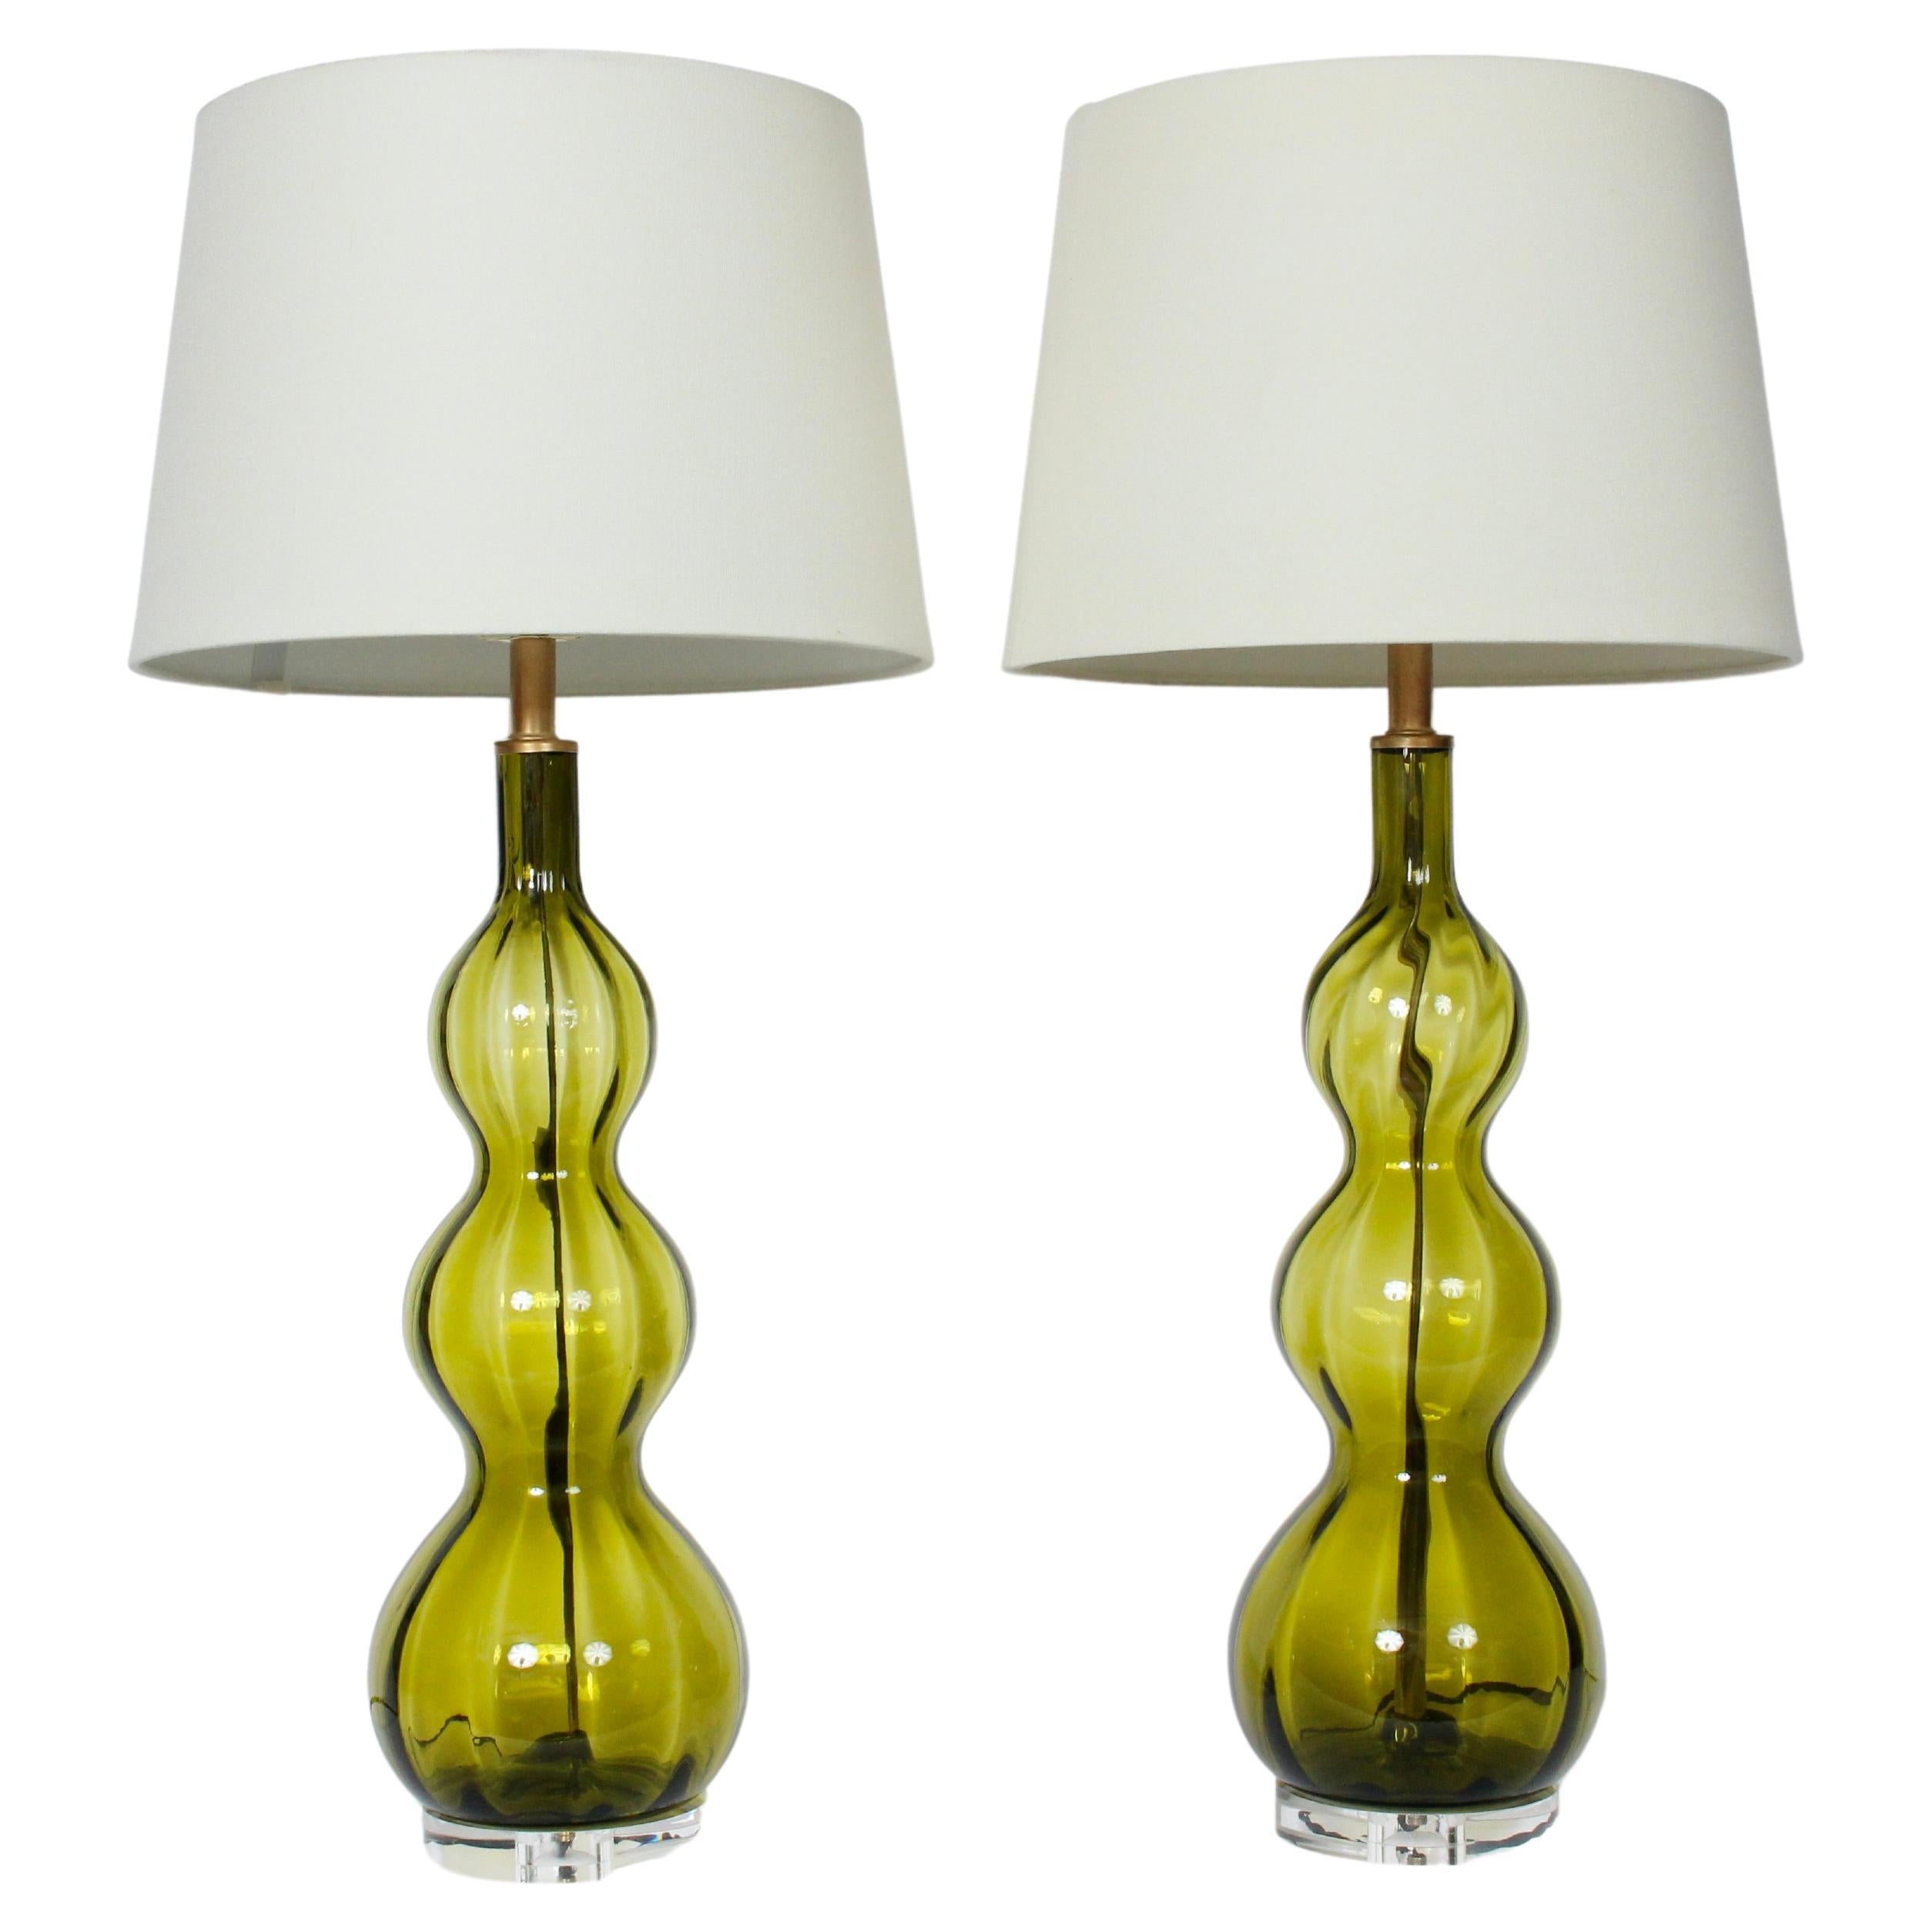 Substantial pair of organic modern ribbed olive green glass table lamps. 
Featuring a tall, triple gourd hand blown translucent Army Green coloration, Brass necks, atop (6D x 1H) clear Lucite bases. 26.5H to top of Socket. 21.5H to top of Glass.